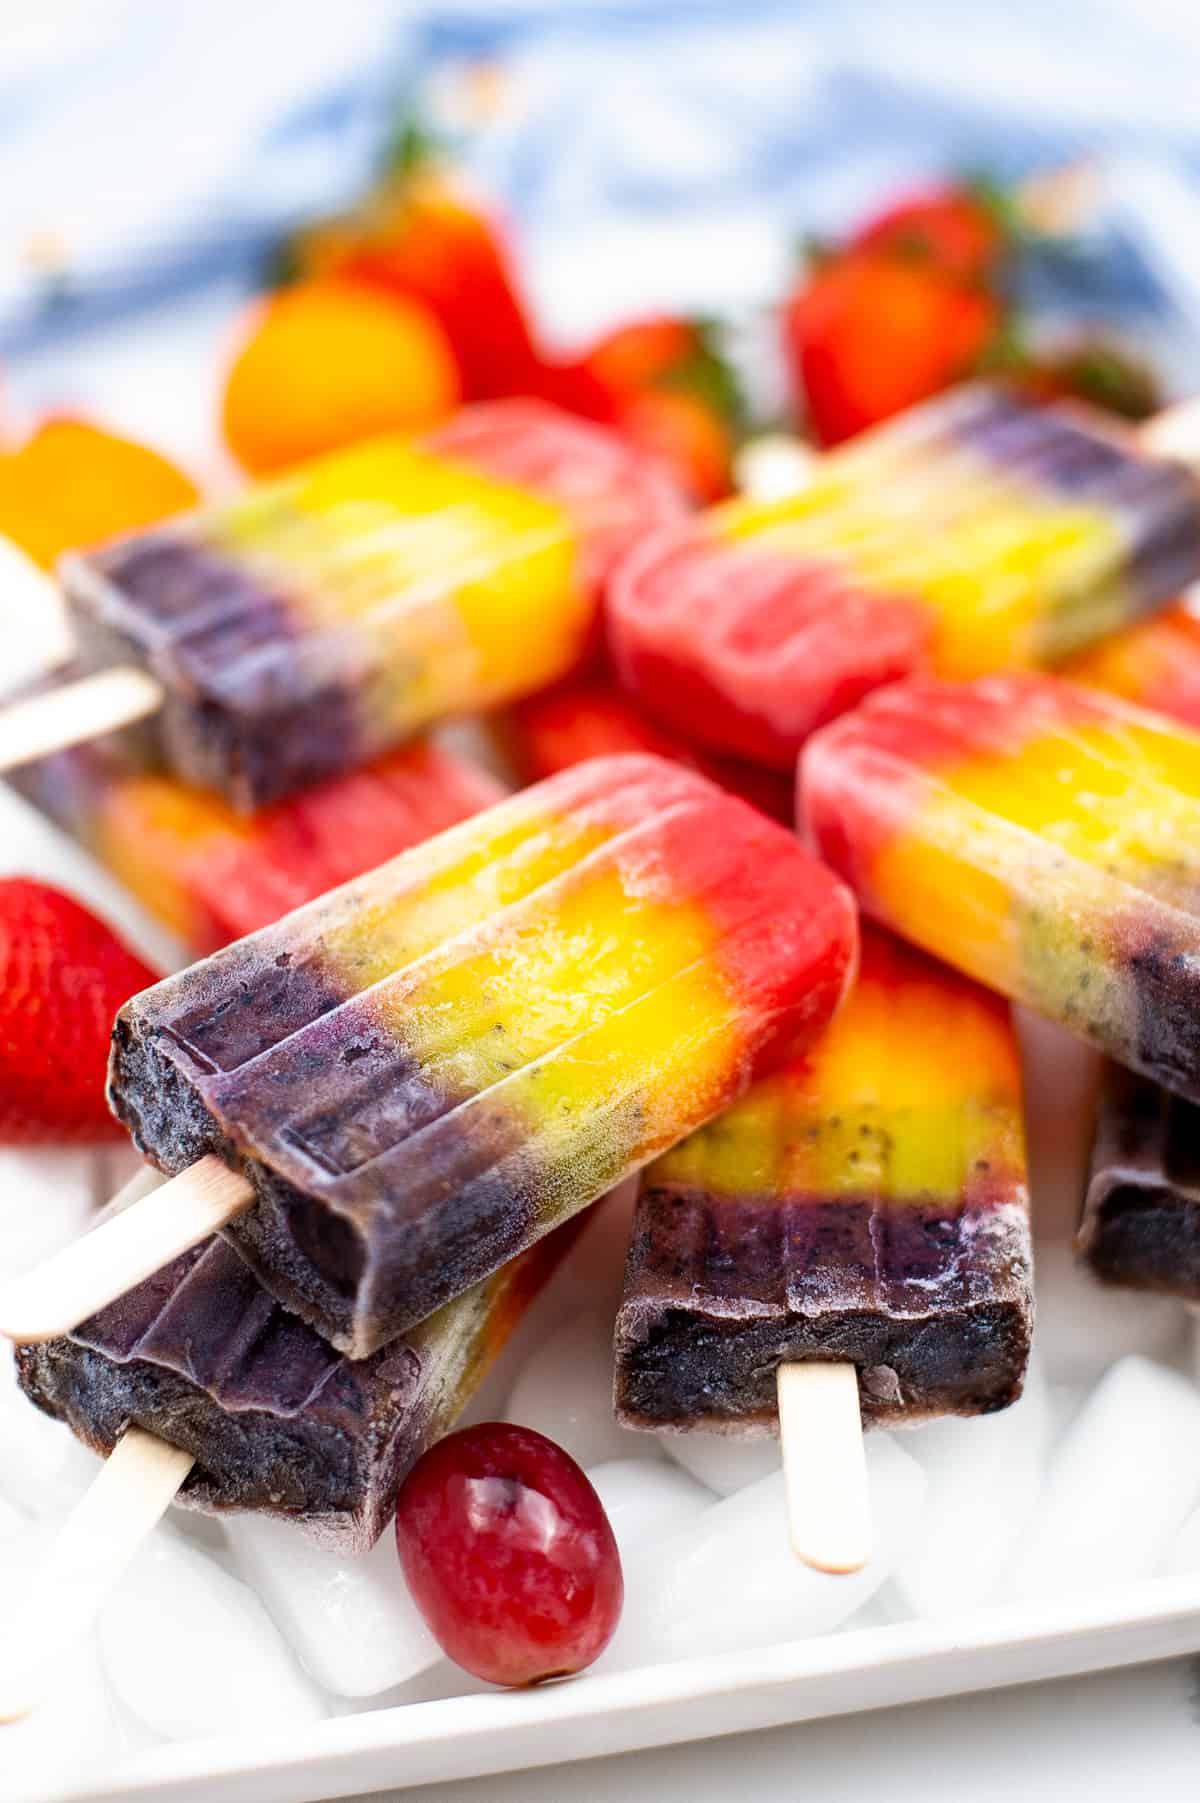 Bright and colorful rainbow fruit popsicles served on a bed of ice on a white plate. Mandarin oranges, strawberries, and grapes surround the plate.